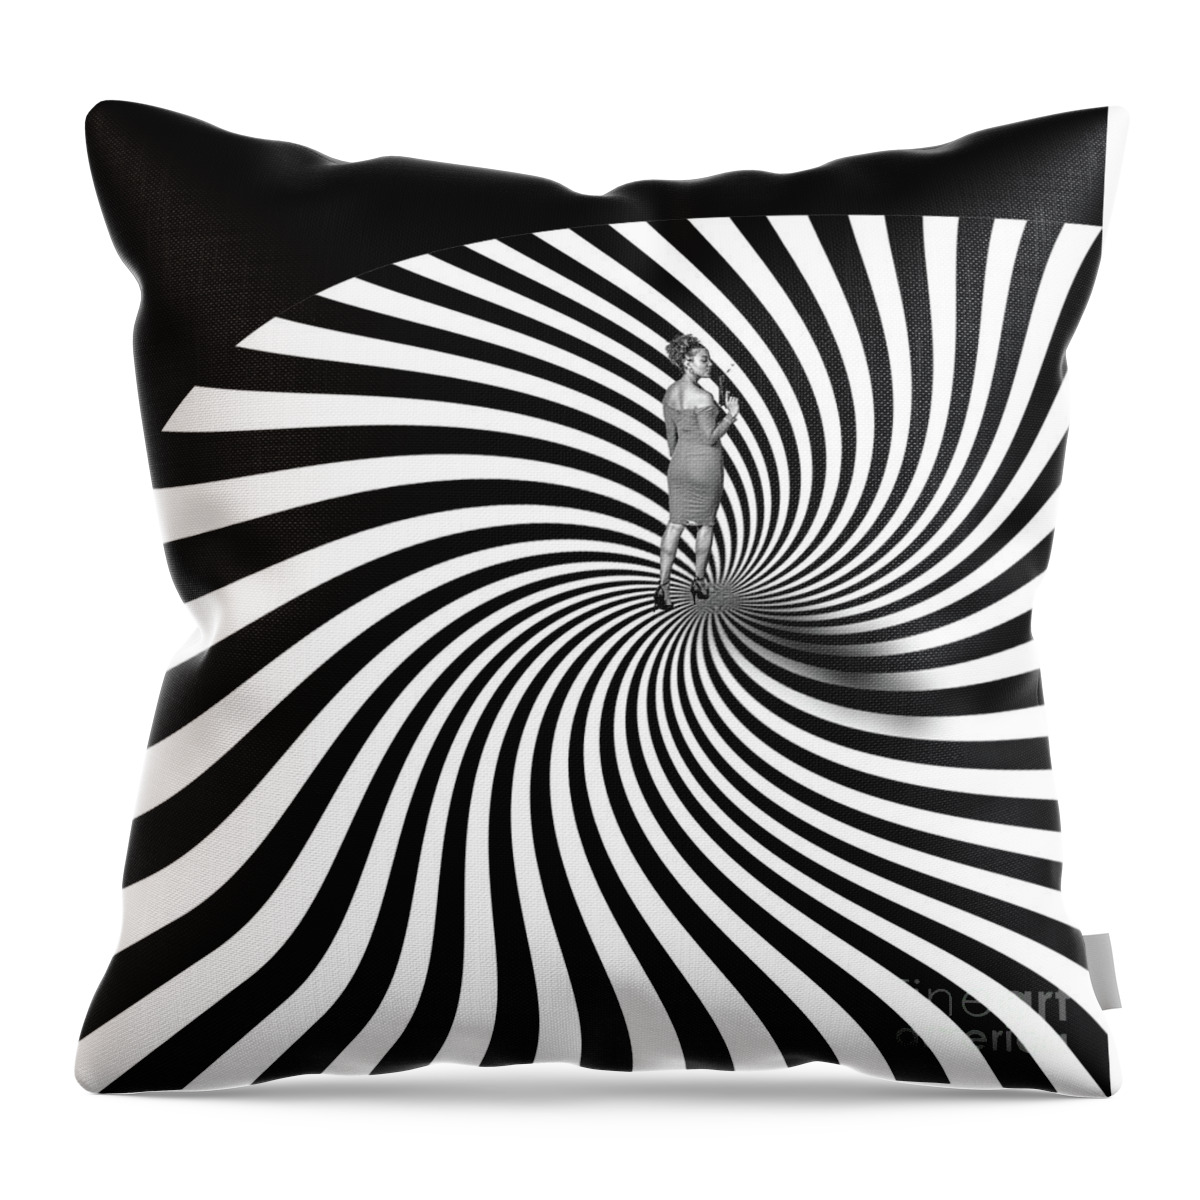 Leaving Throw Pillow featuring the digital art Walking Away by Jim Hatch